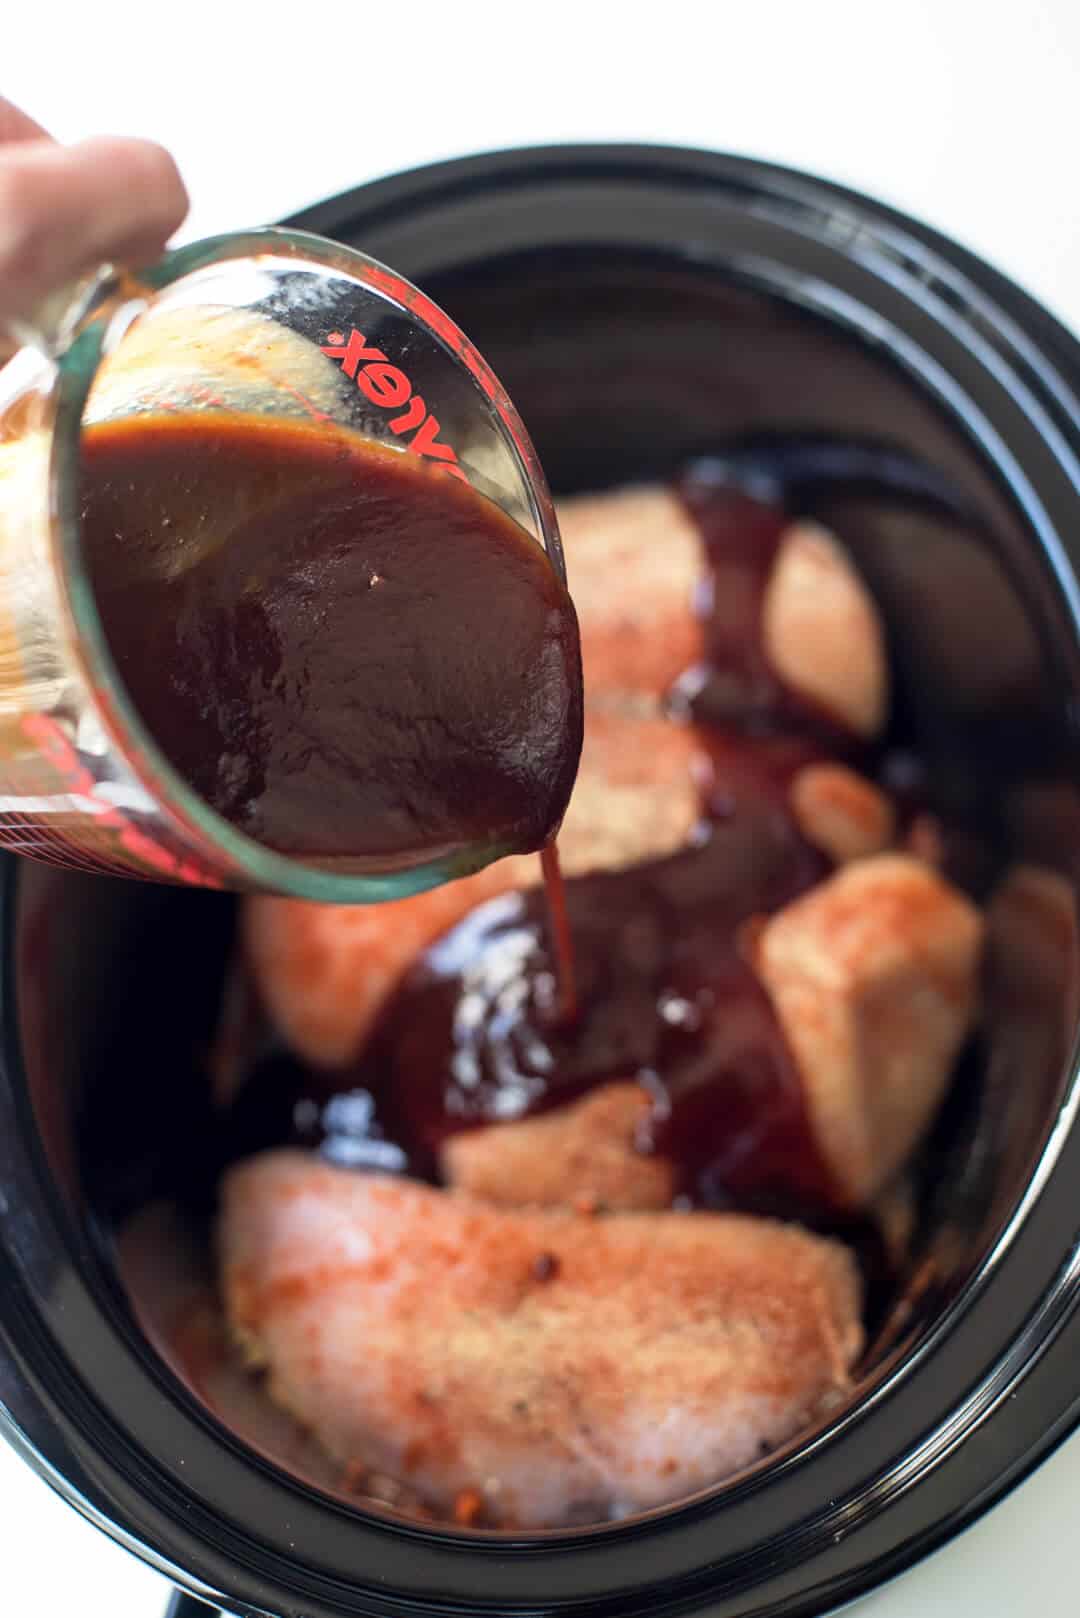 BBQ sauce is poured over the chicken in the slow cooker.